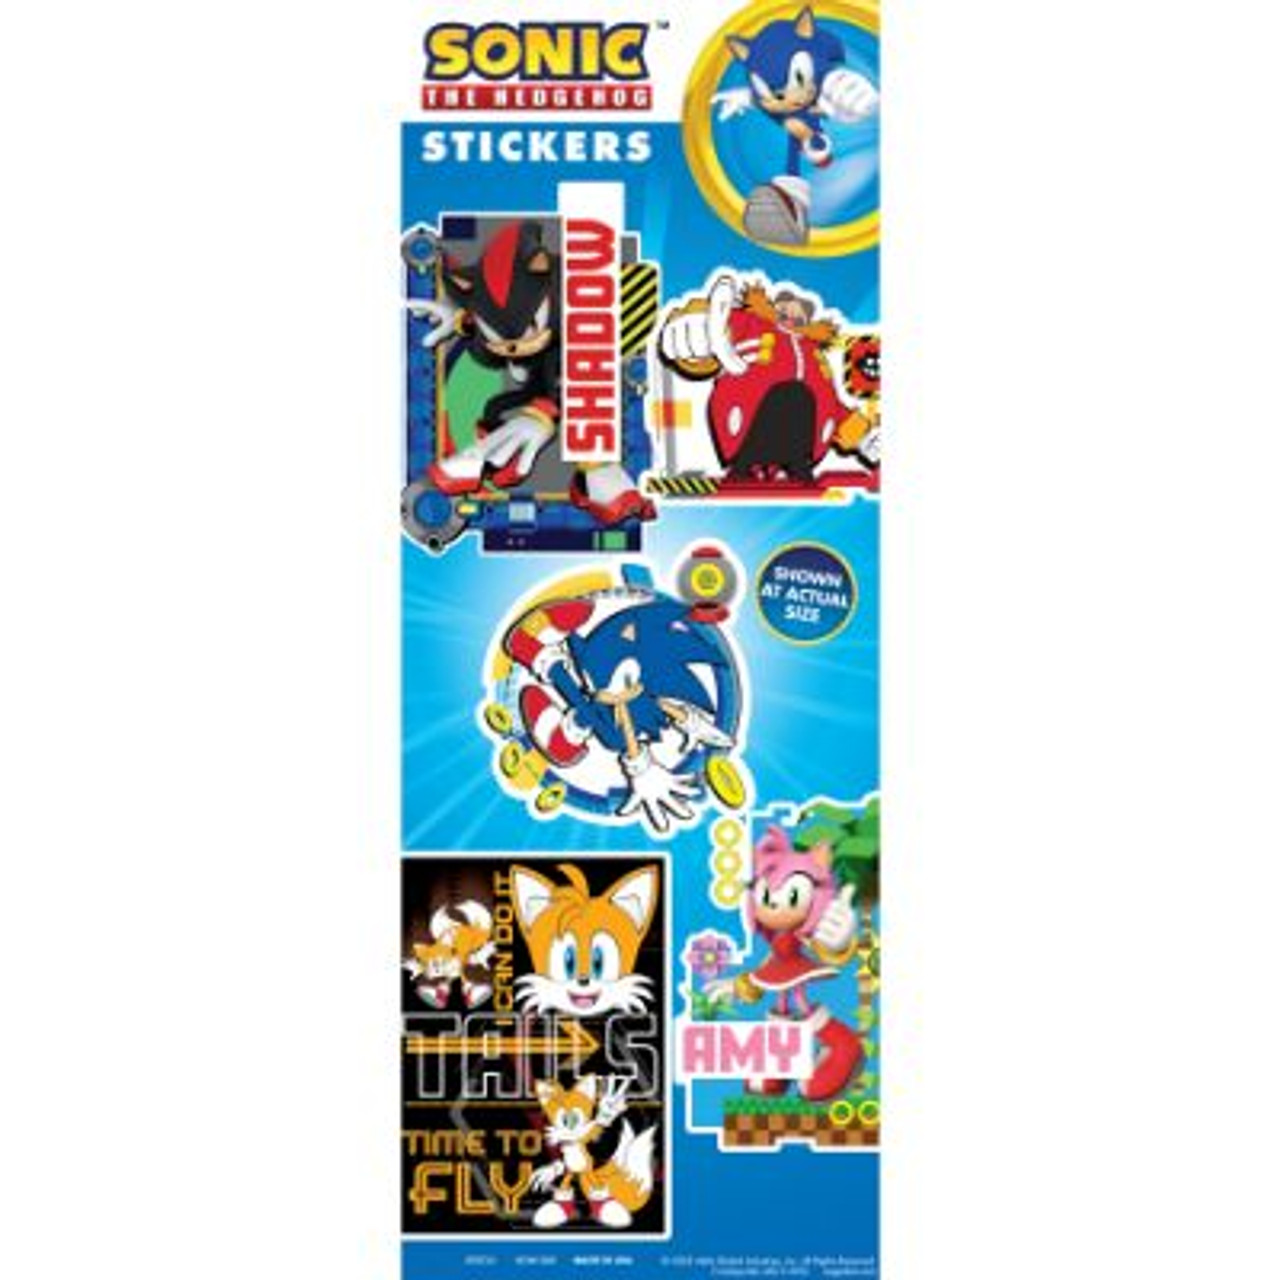 Sonic The Hedgehog Stickers 300 Pieces